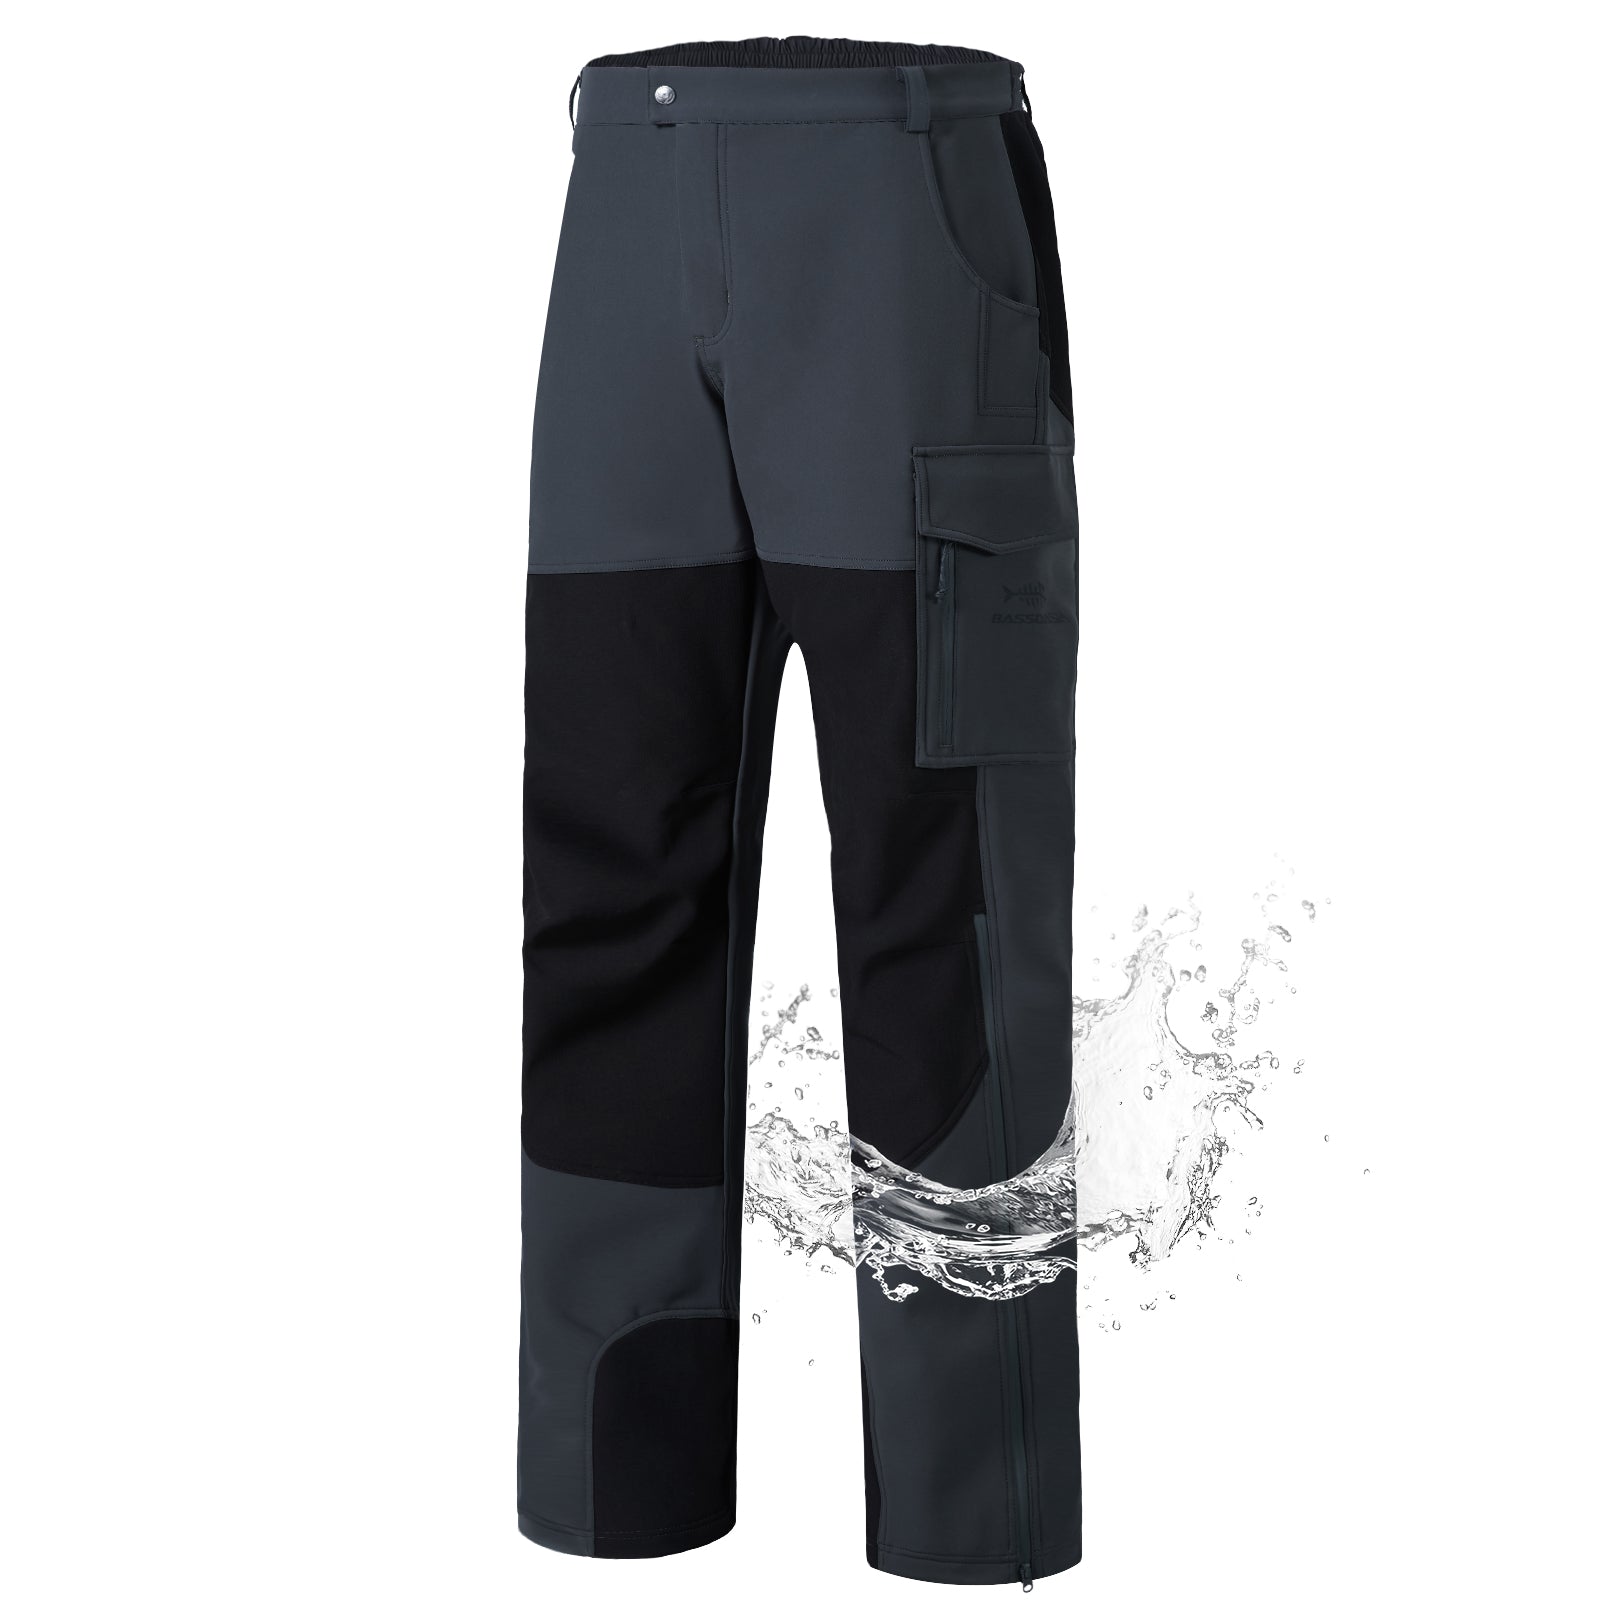 Men's Splice Insulated Softshell Hunting Pants